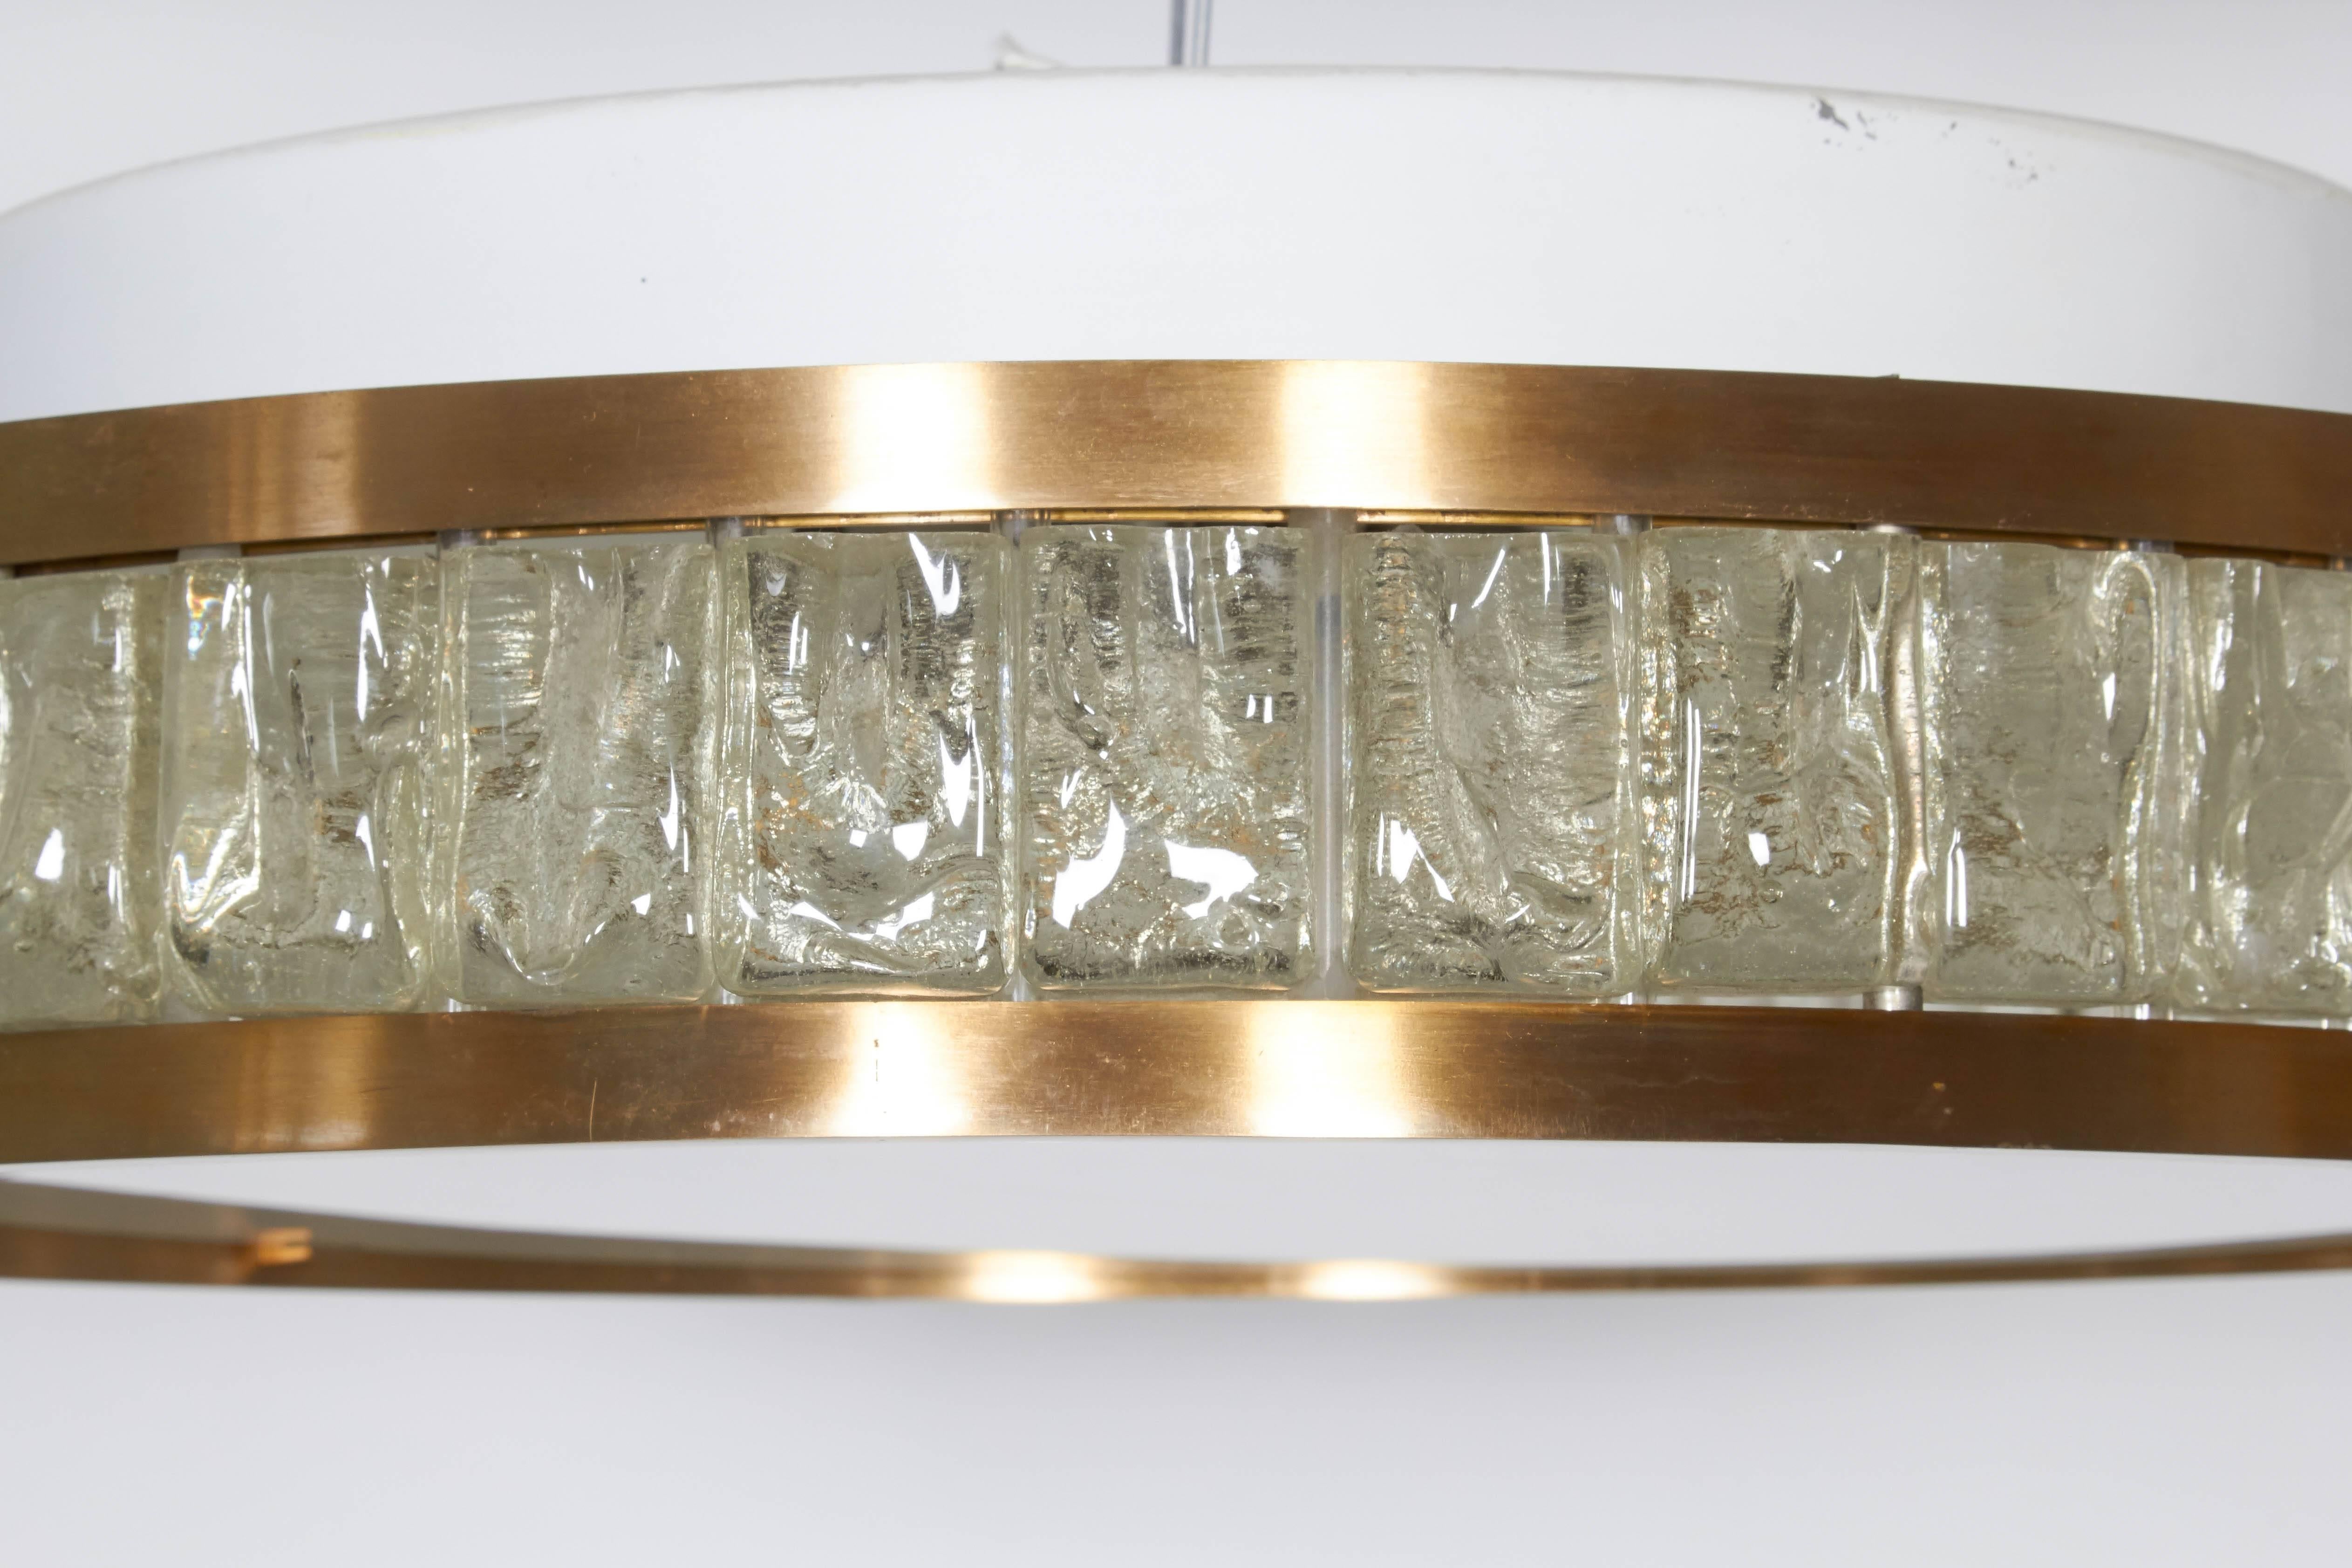 Perzel ceiling fixture made of brass and glass segments, the bottom in white milky glass. There are four sockets inside.